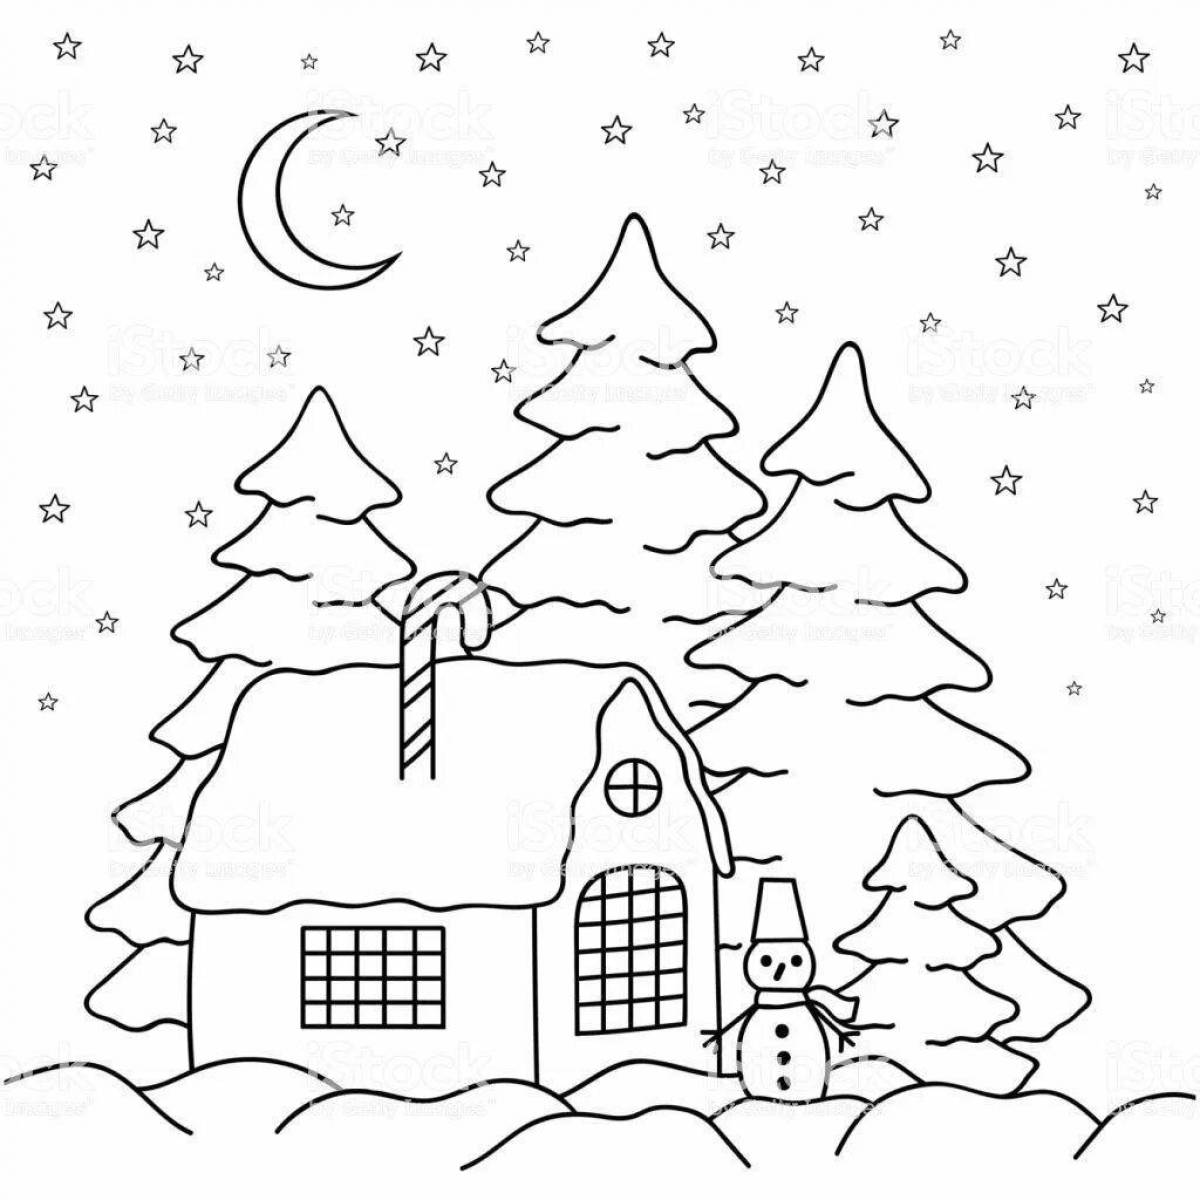 Glowing winter landscape coloring book for children 3-4 years old